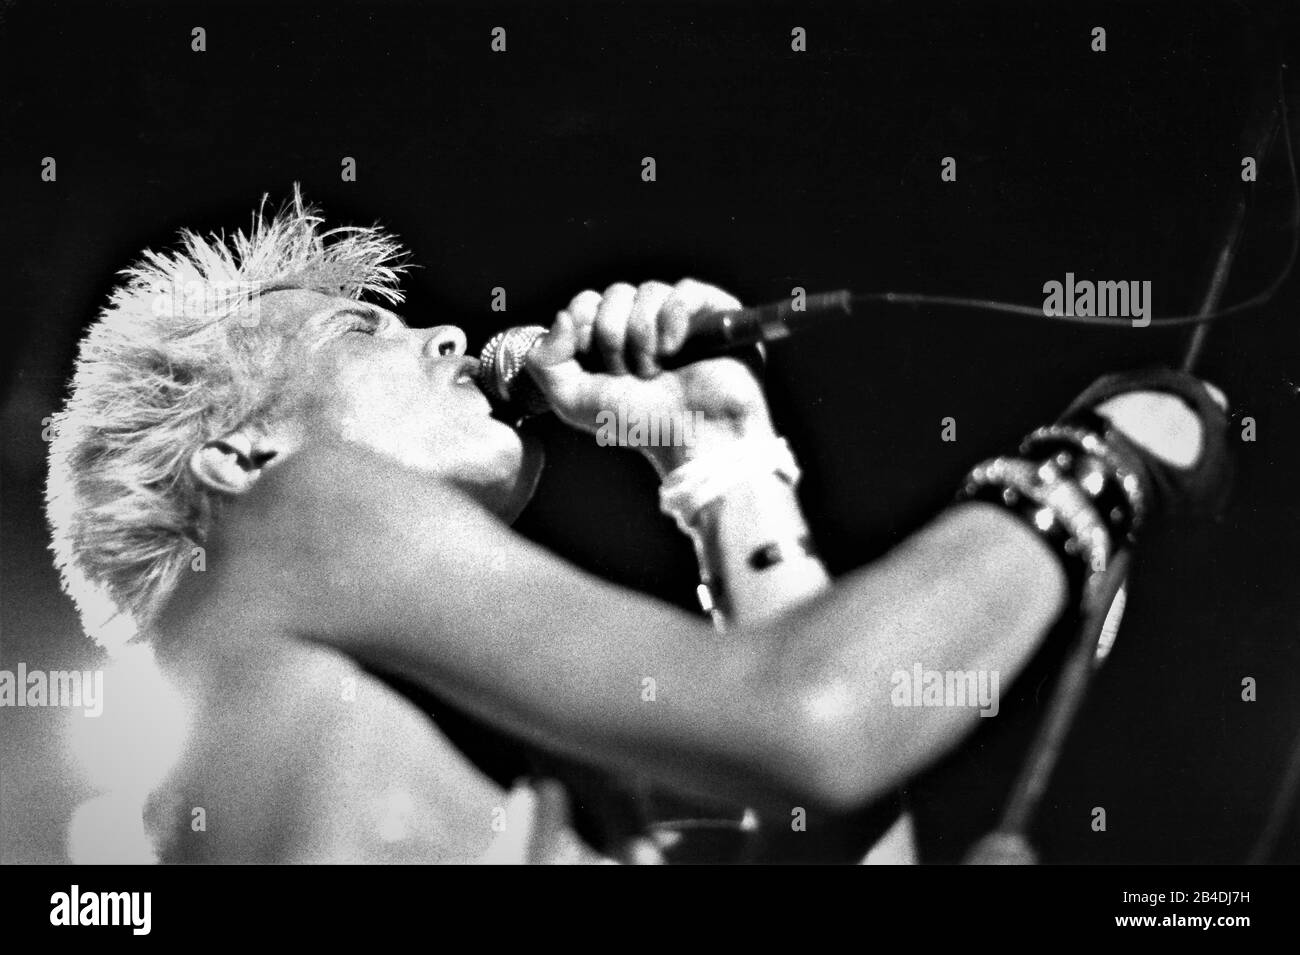 Billy Idol singing and performing on stage in California on his world tour without shirt:  William Michael Albert Broad (born 30 November 1955), known professionally as Billy Idol, is an English musician, singer, songwriter, and actor who holds dual British and American citizenship.[1] He first achieved fame in the 1970s emerging from the London punk rock scene as a member of Generation X. Subsequently, he embarked on a solo career which led to international recognition and made Idol a lead artist during the MTV-driven 'Second British Invasion' in the United States. The name 'Billy Idol' was i Stock Photo